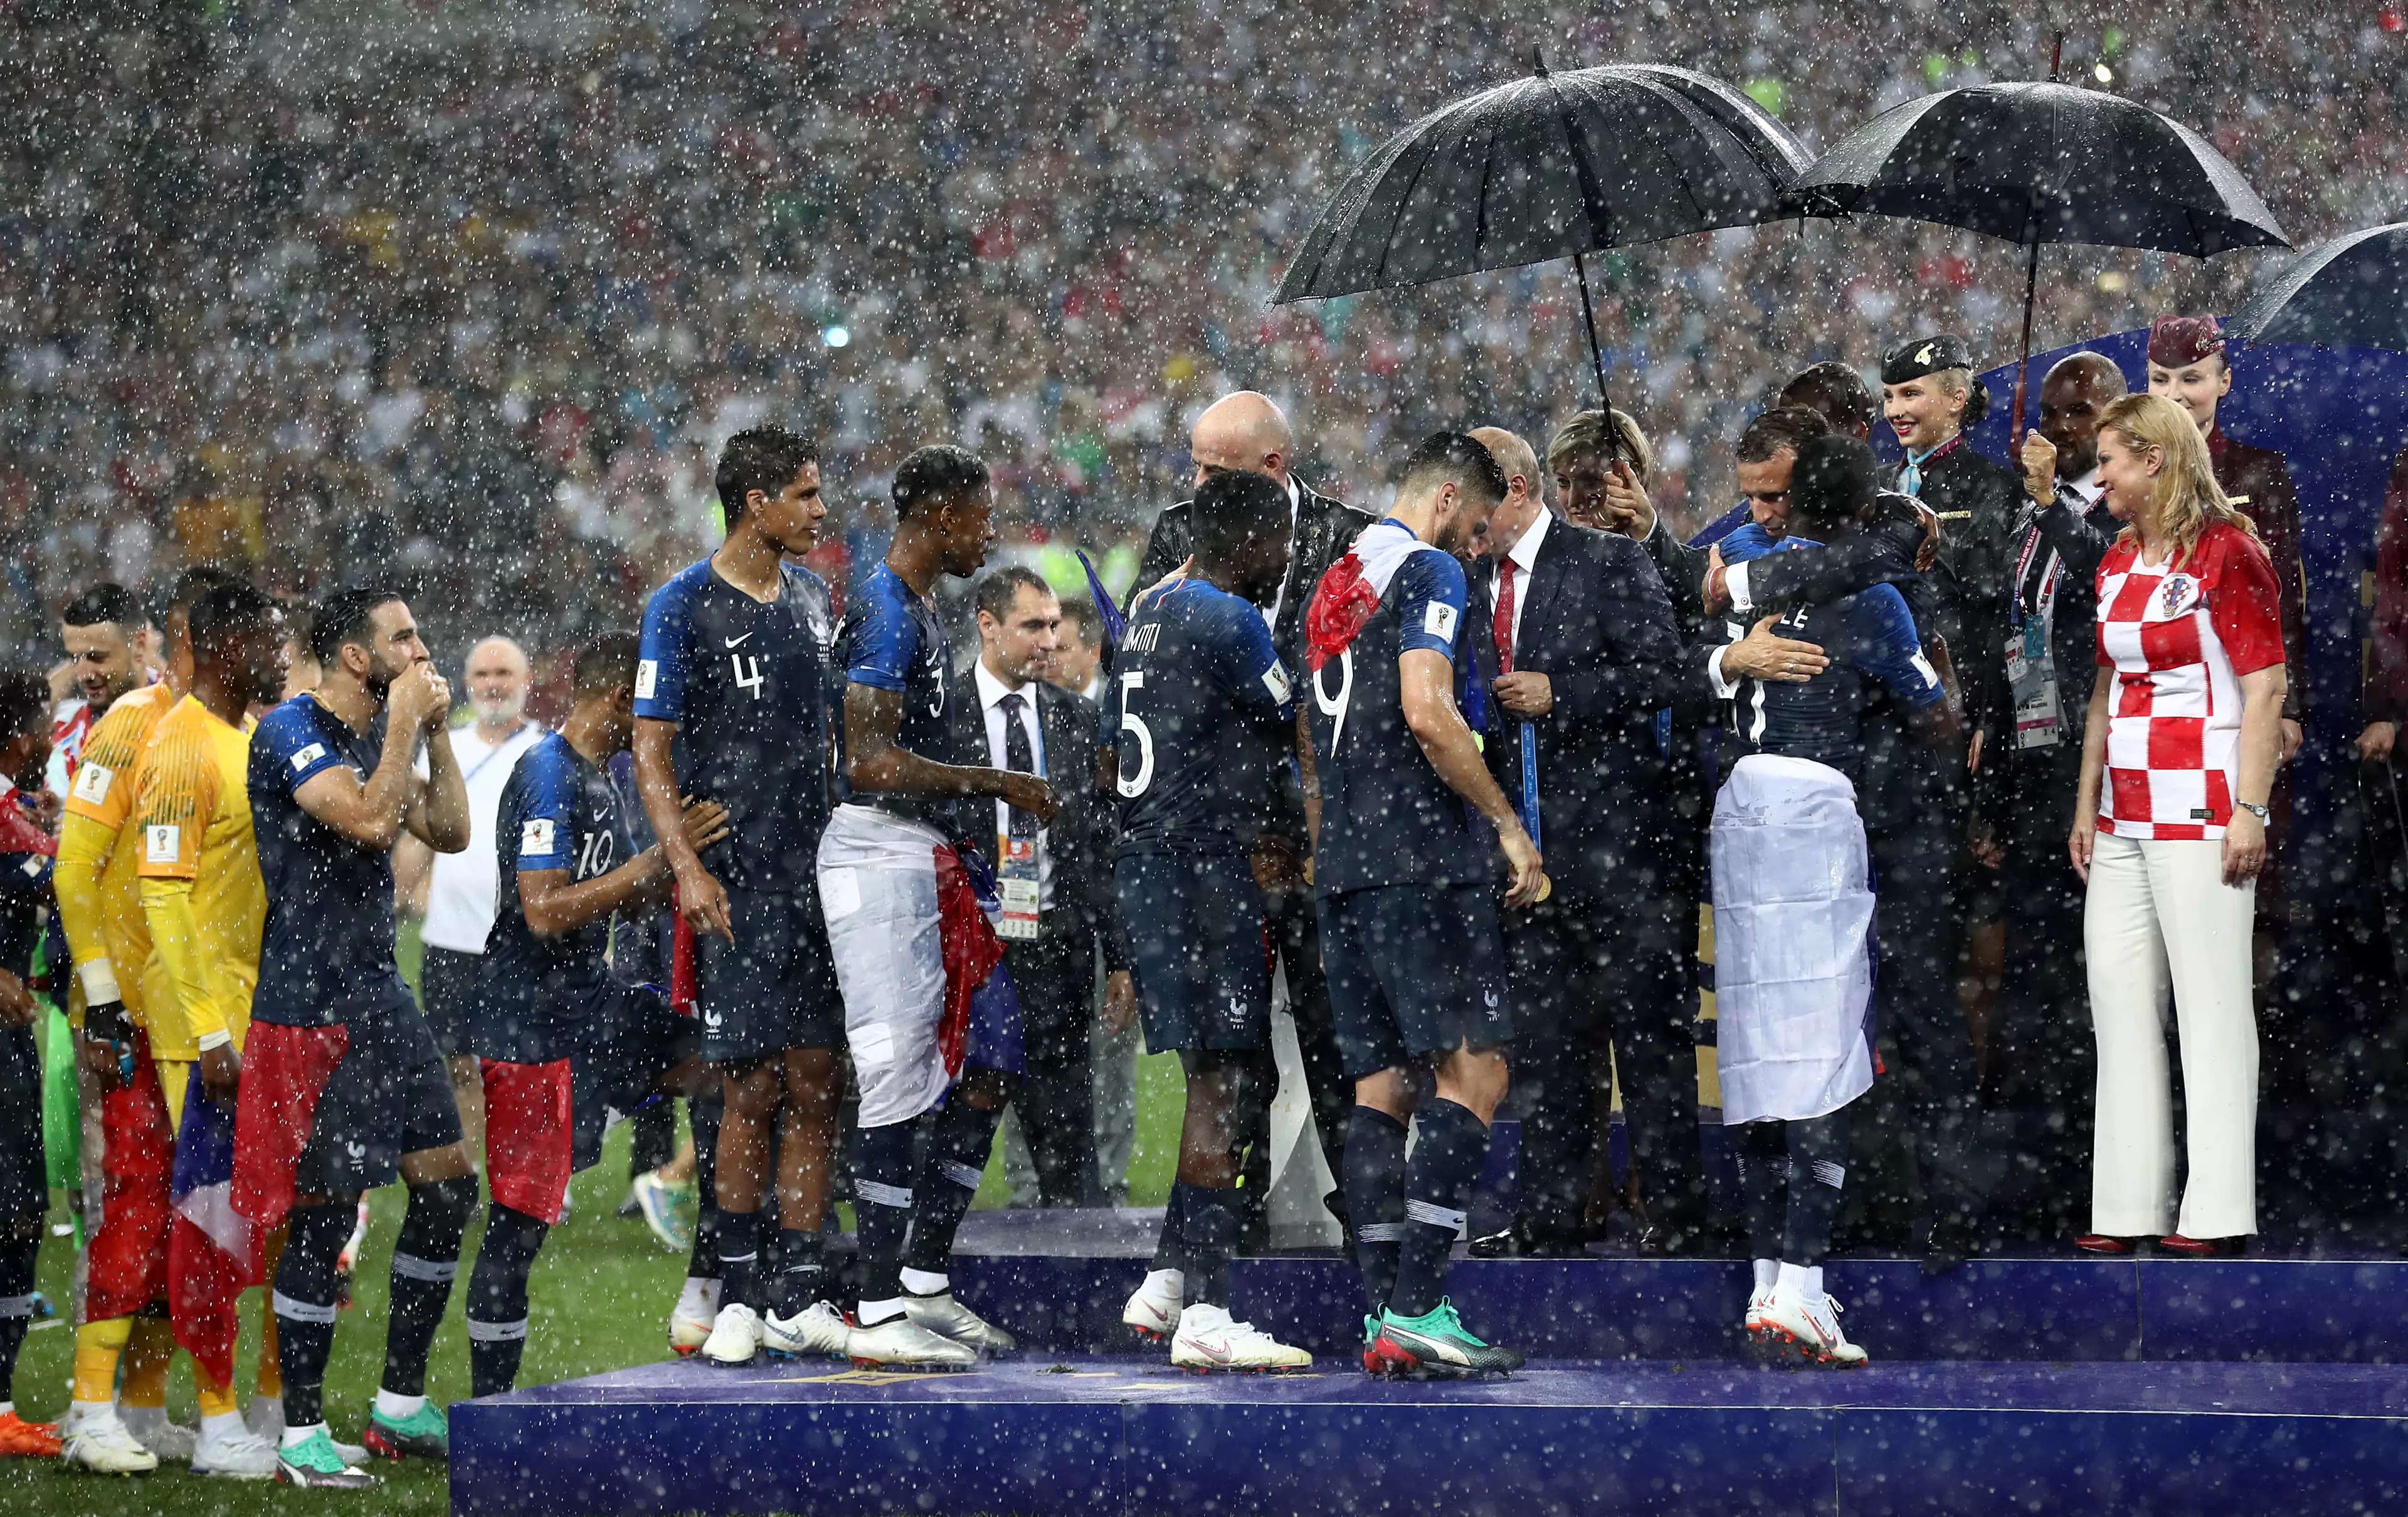 Everyone Got Soaked At The World Cup Final, Except Vladimir Putin